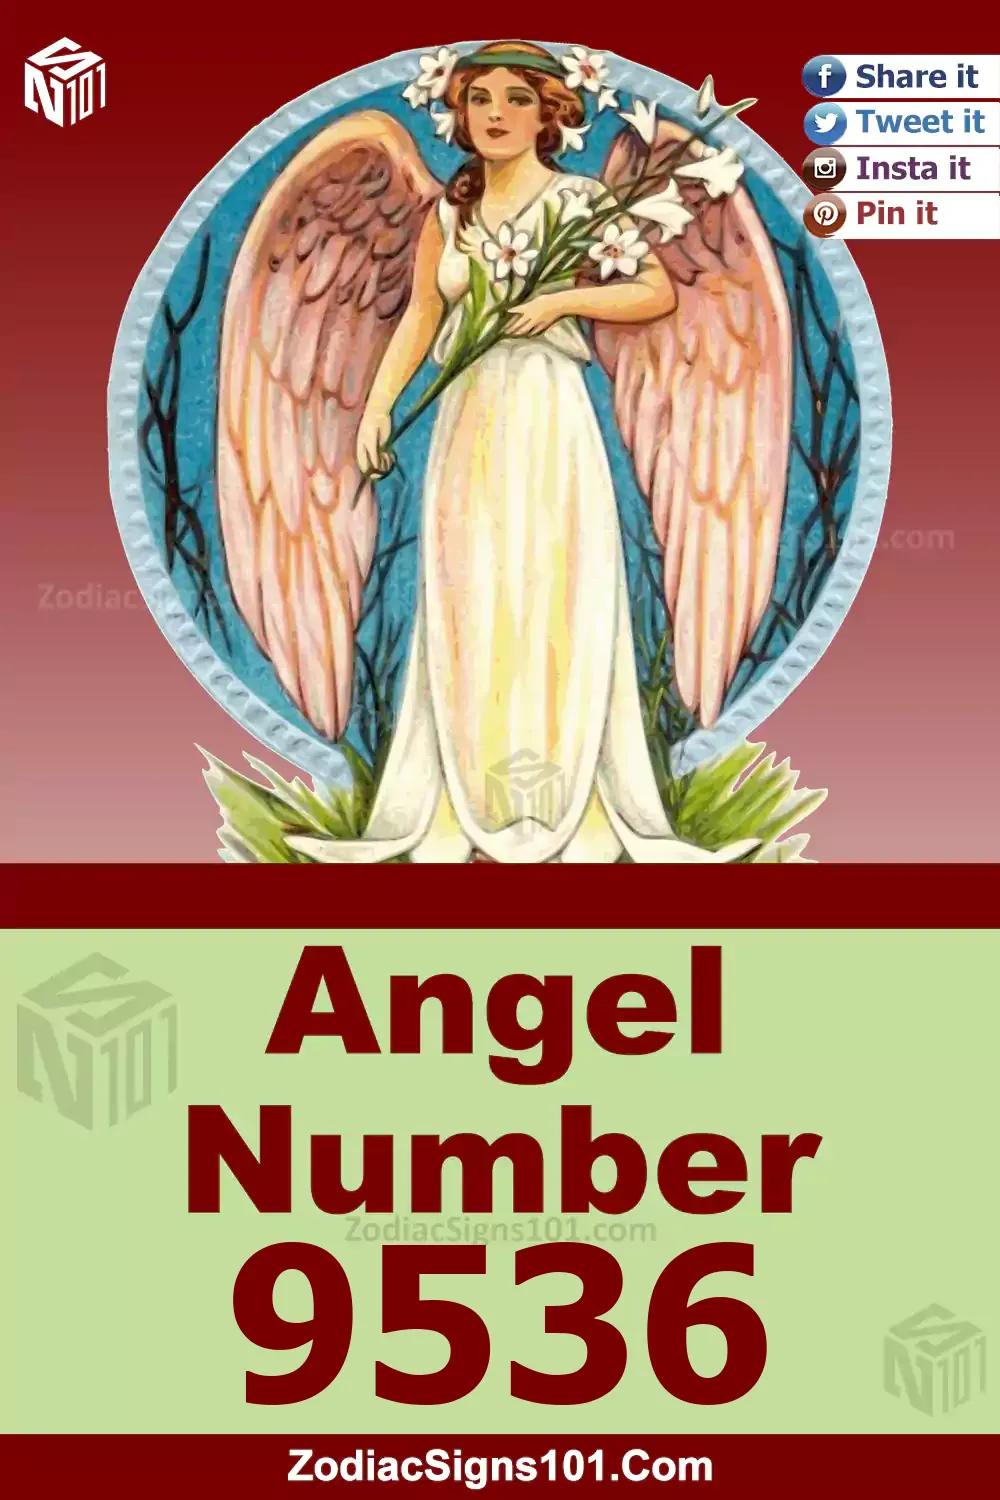 9536 Angel Number Meaning